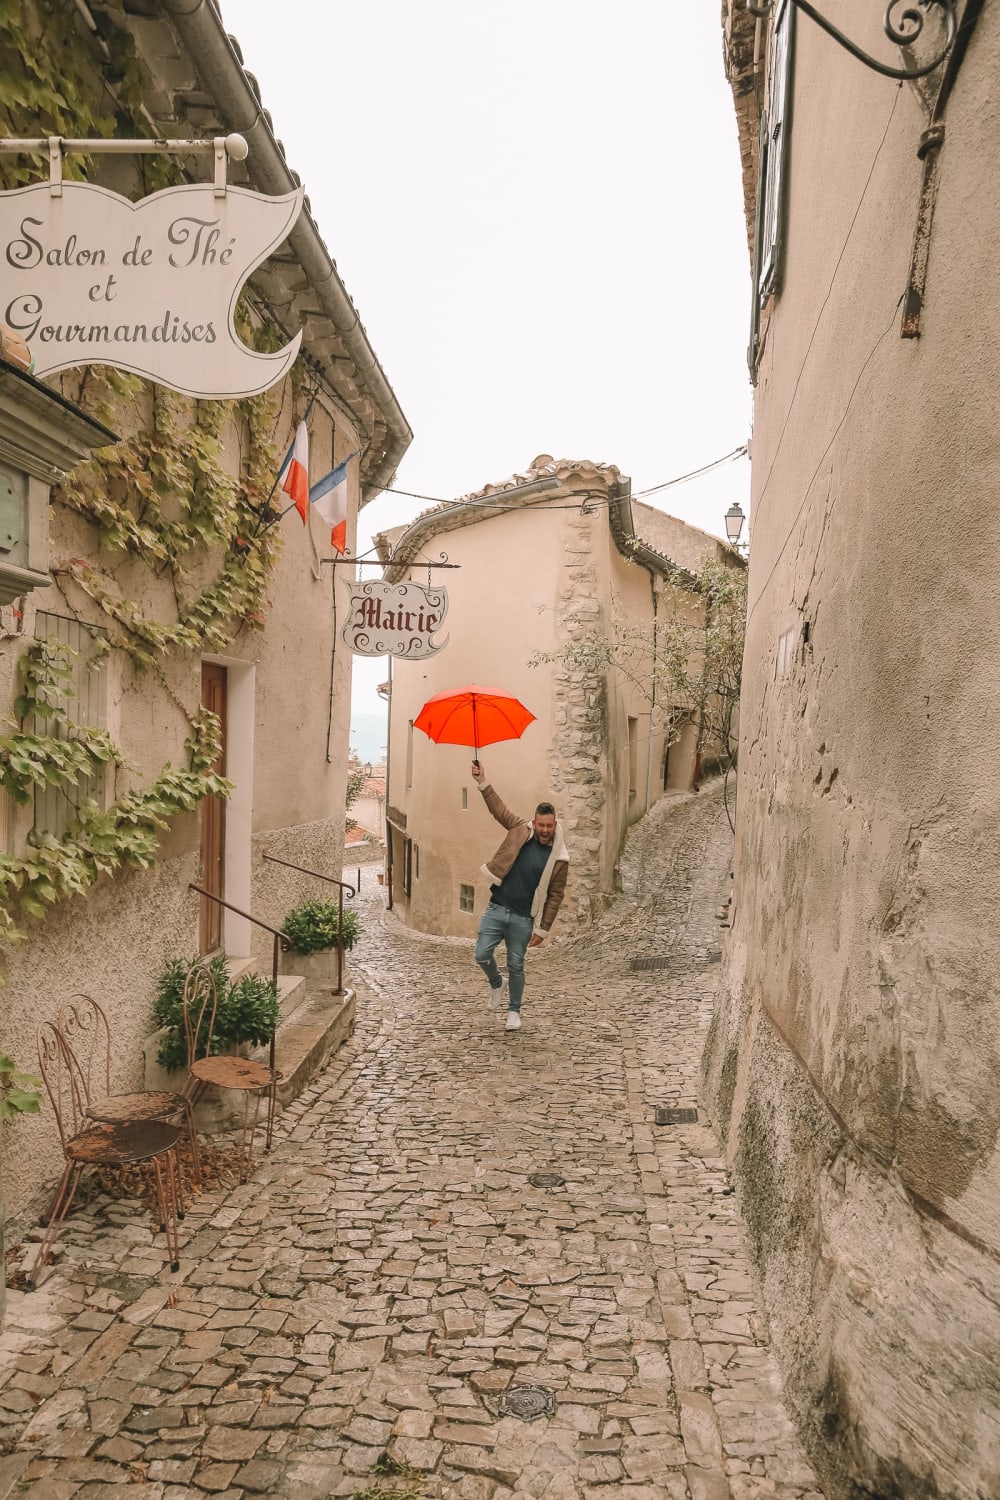 The Pretty Little Villages Of Provence, France